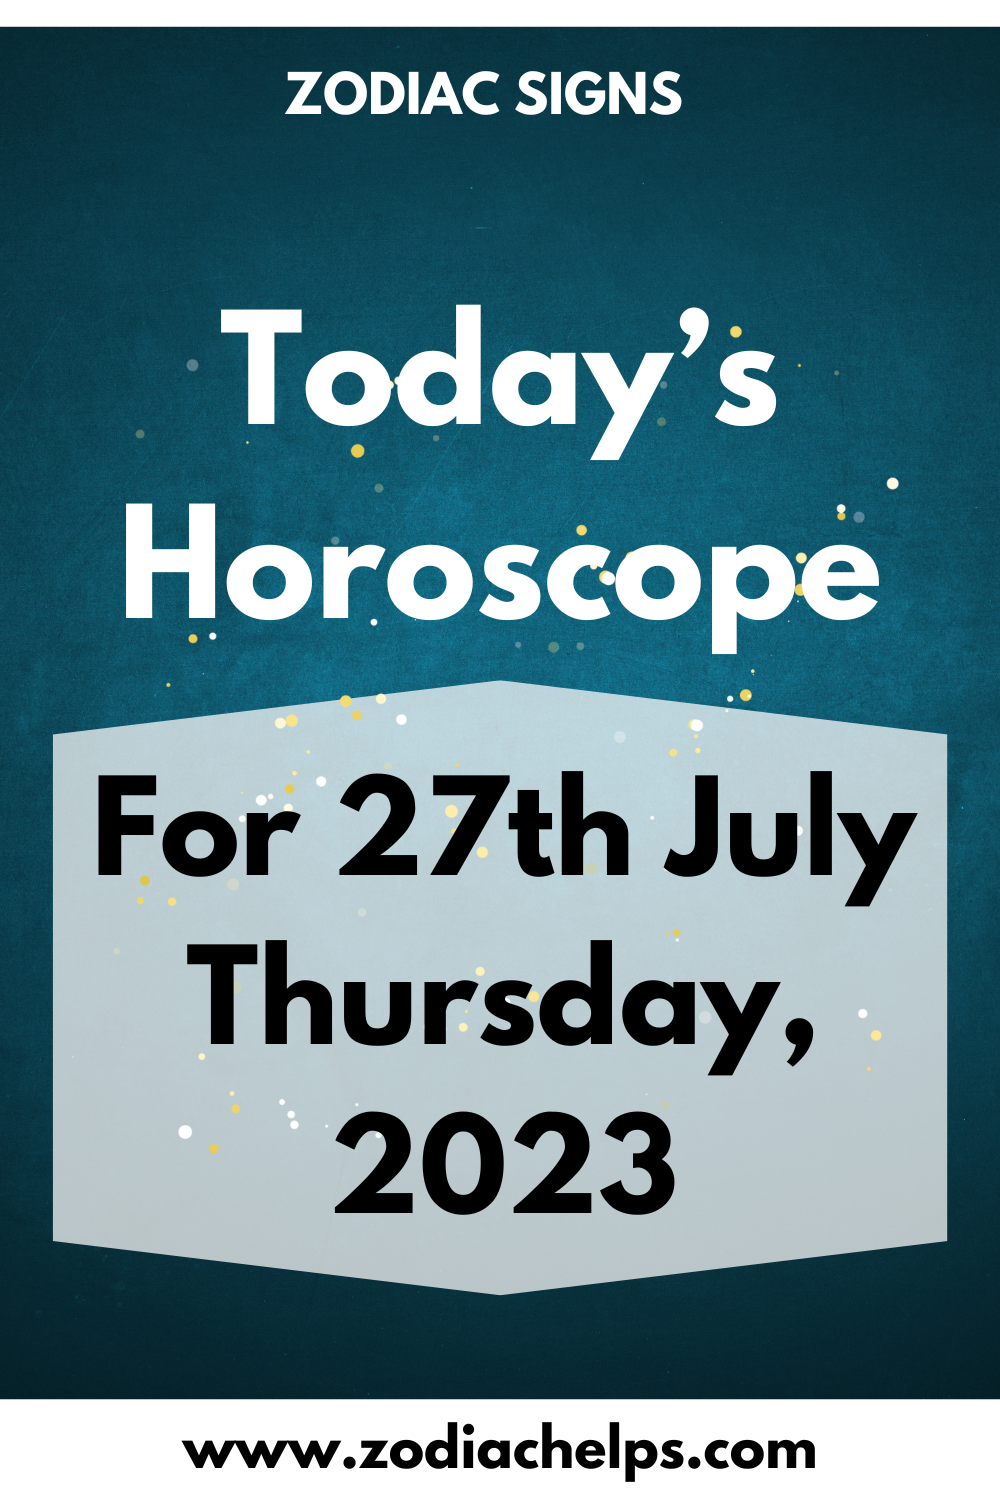 Today’s Horoscope for 27th July Thursday, 2023